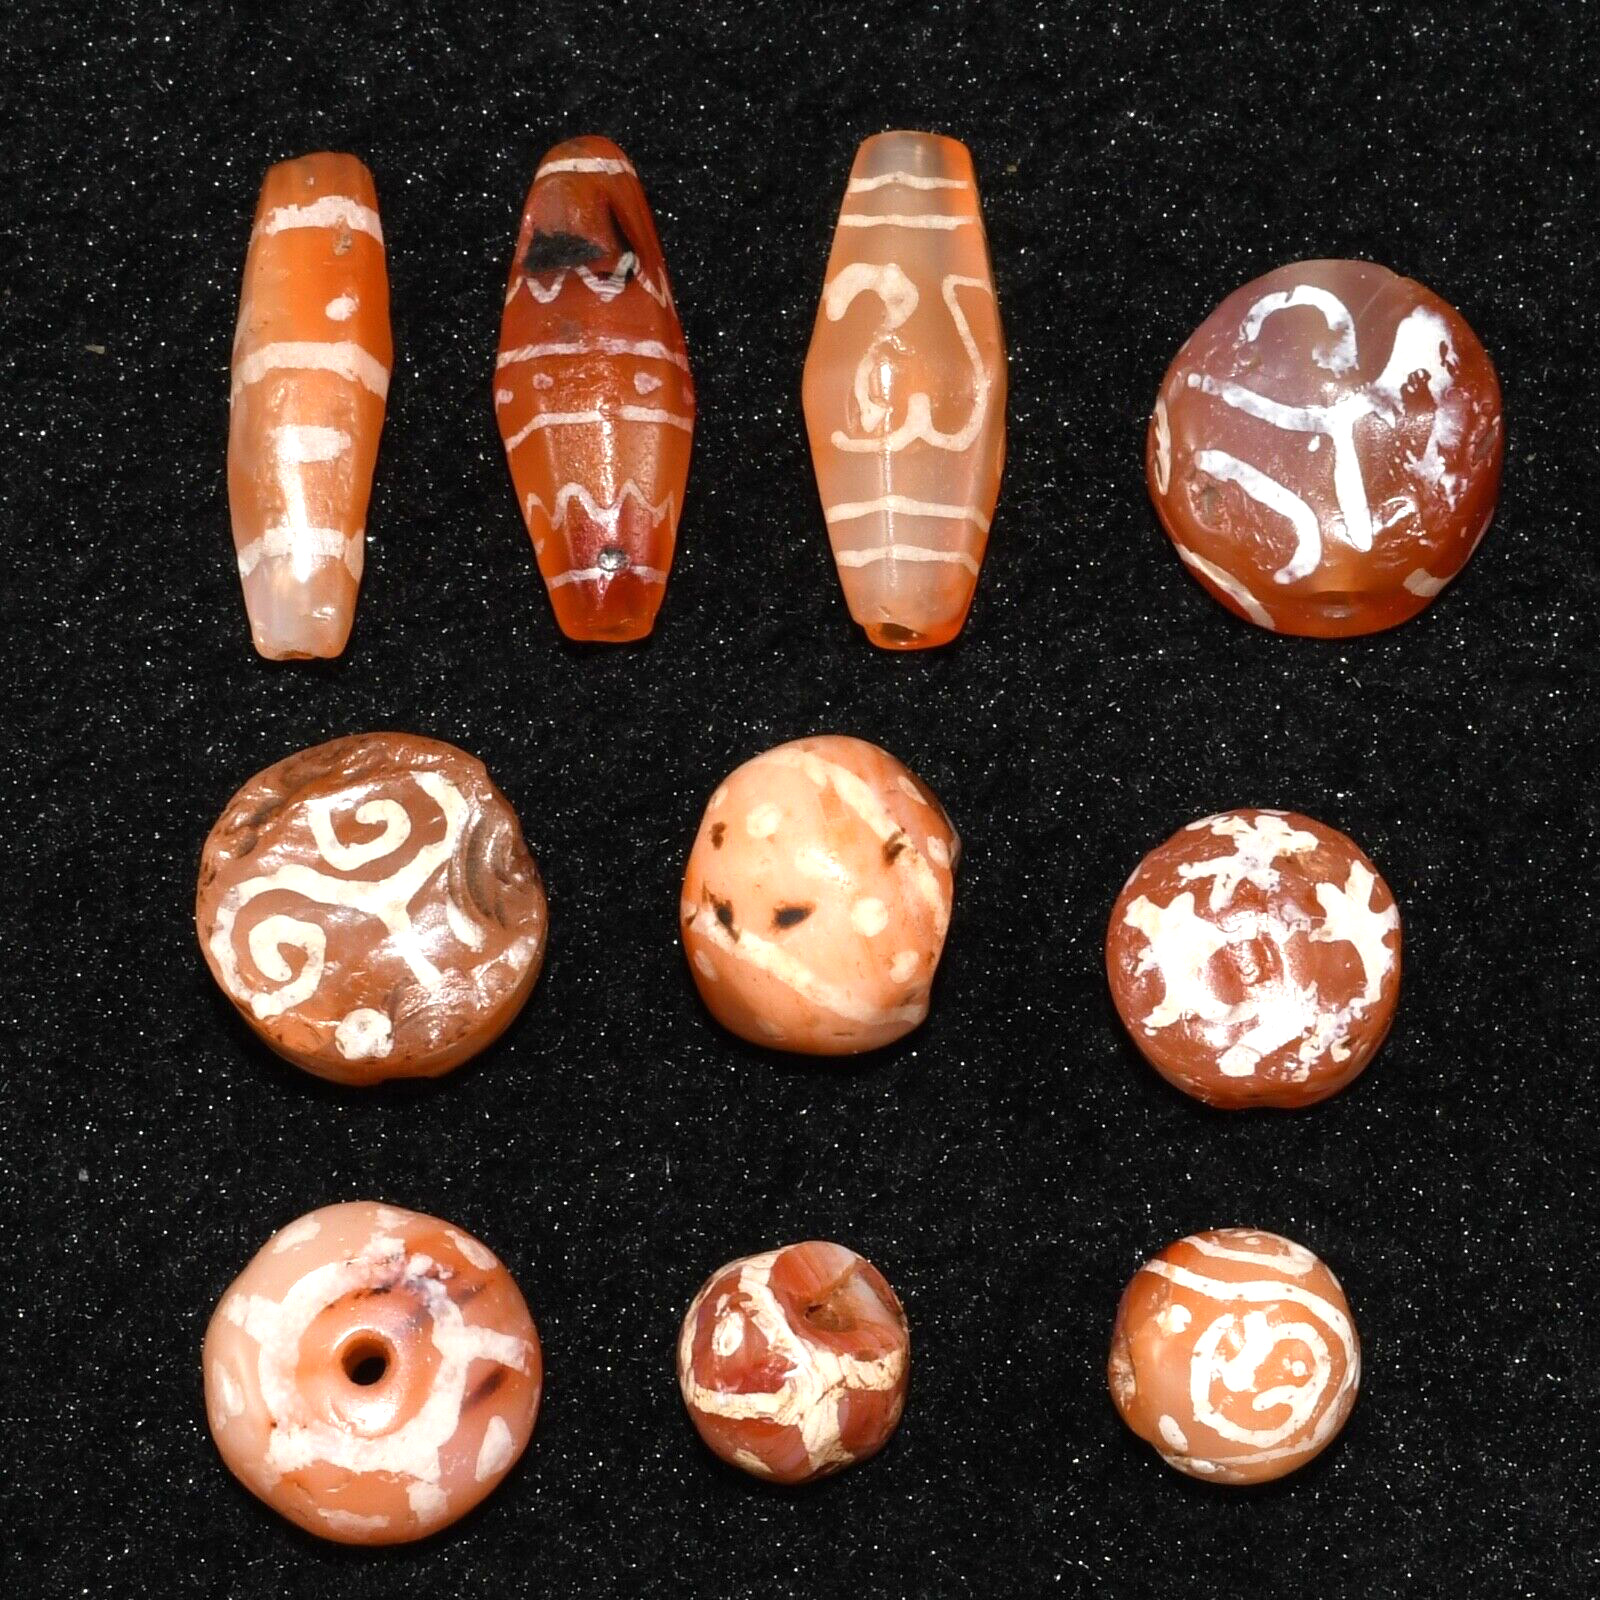 10 Large Ancient Etched Carnelian Beads in Good Condition over 2000 Years Old